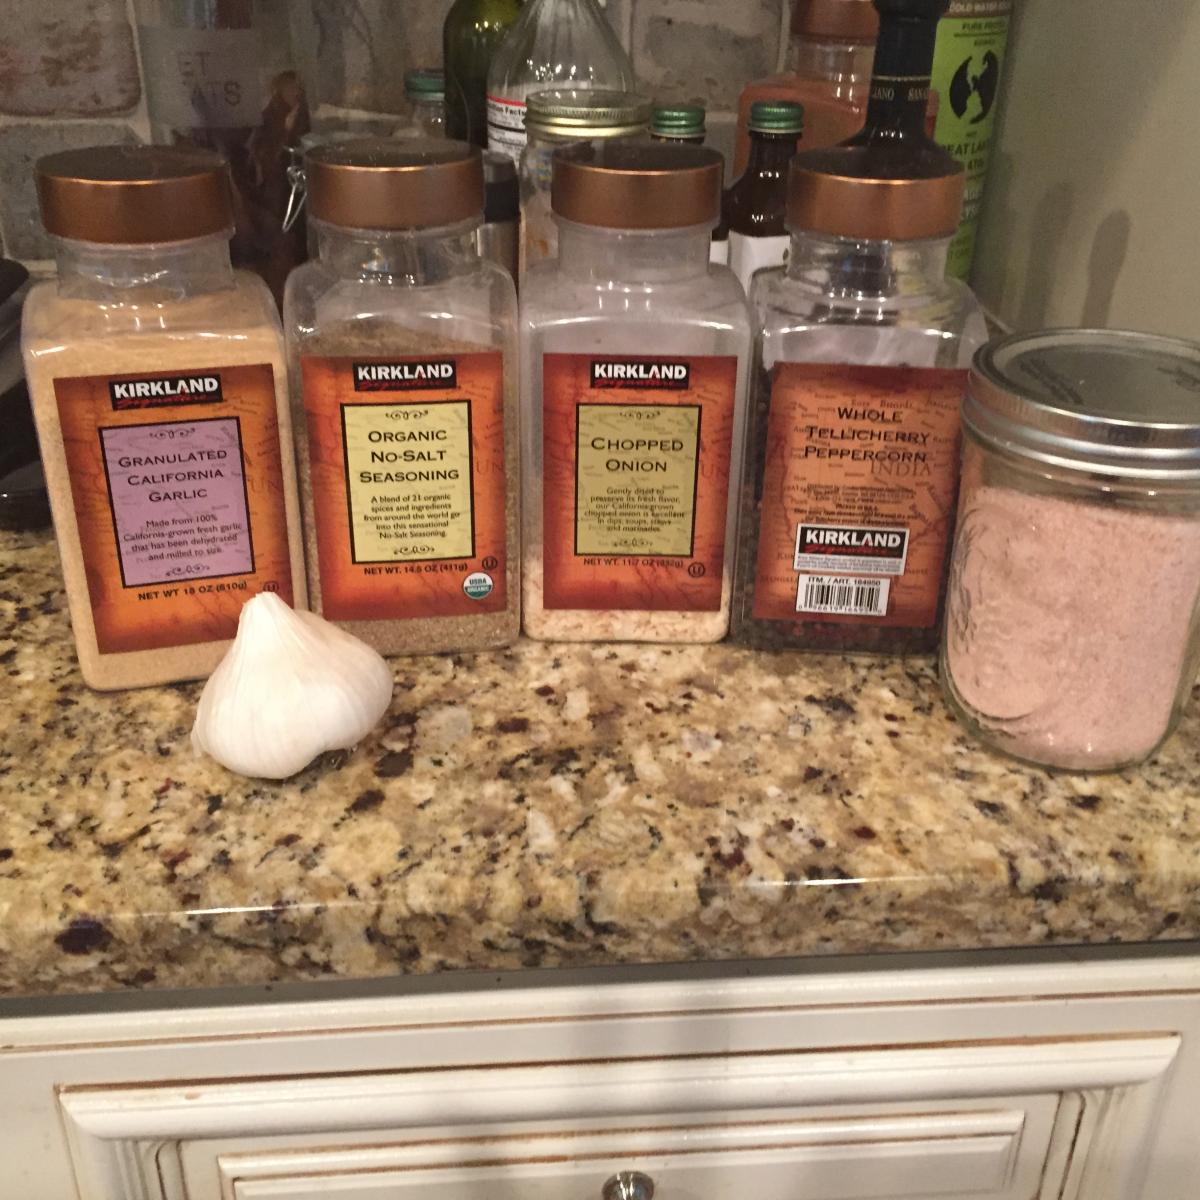 Some broth spices